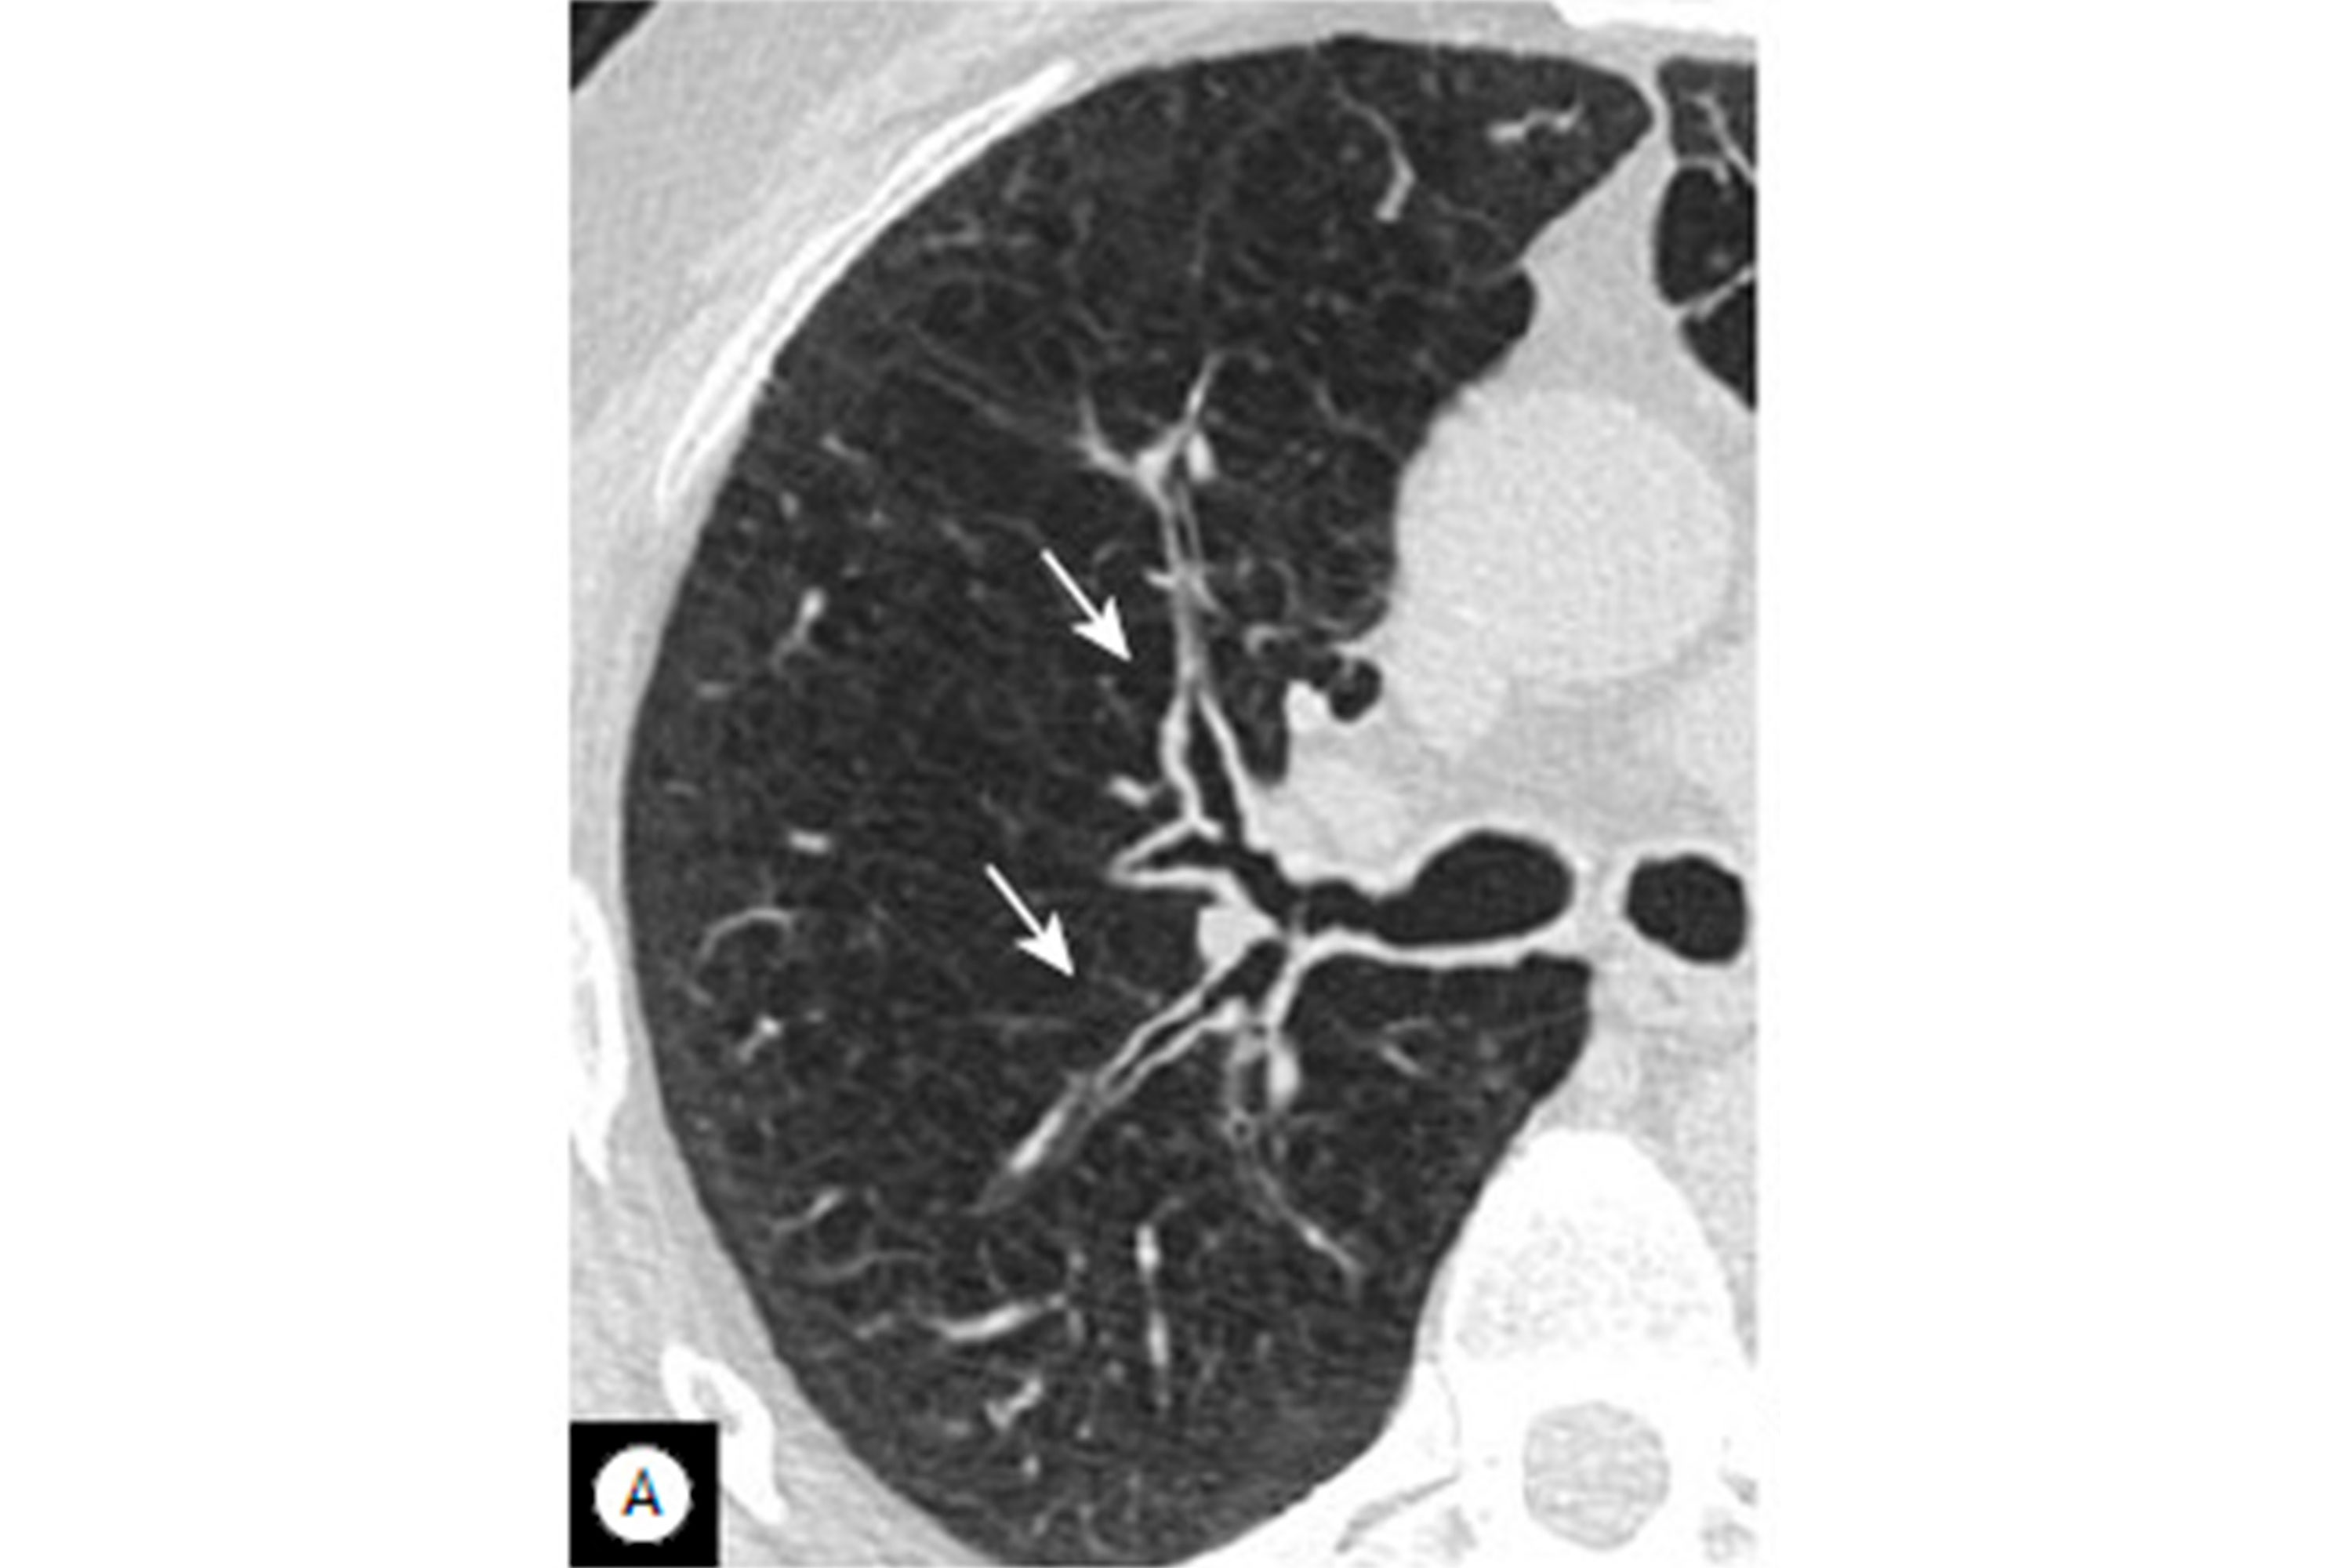 Copd Ct Scan Findings